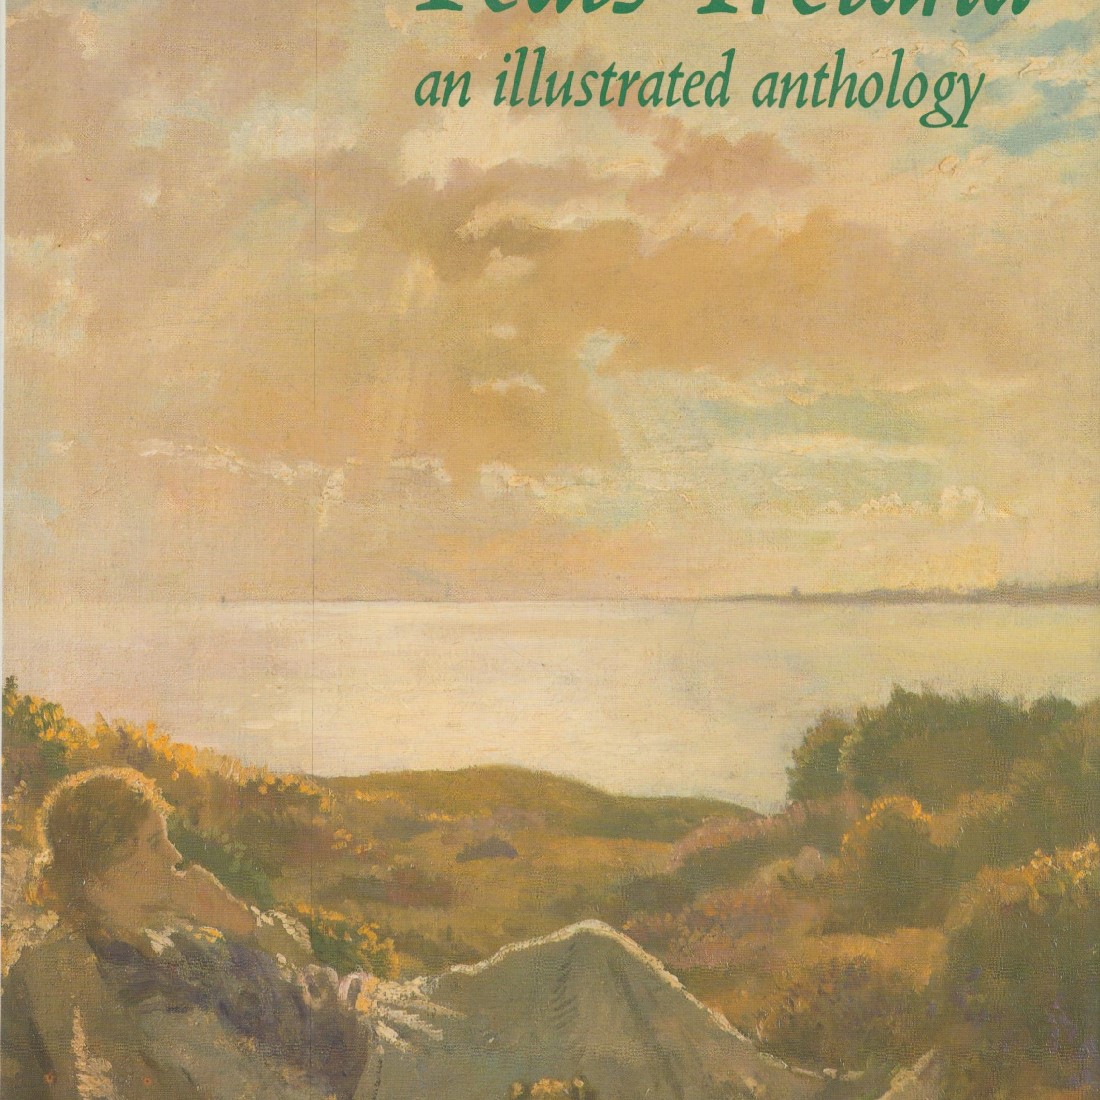 Yeats' Ireland - an Illustrated Anthology by Benedict Kiely 1989 Hardback Book First Edition with